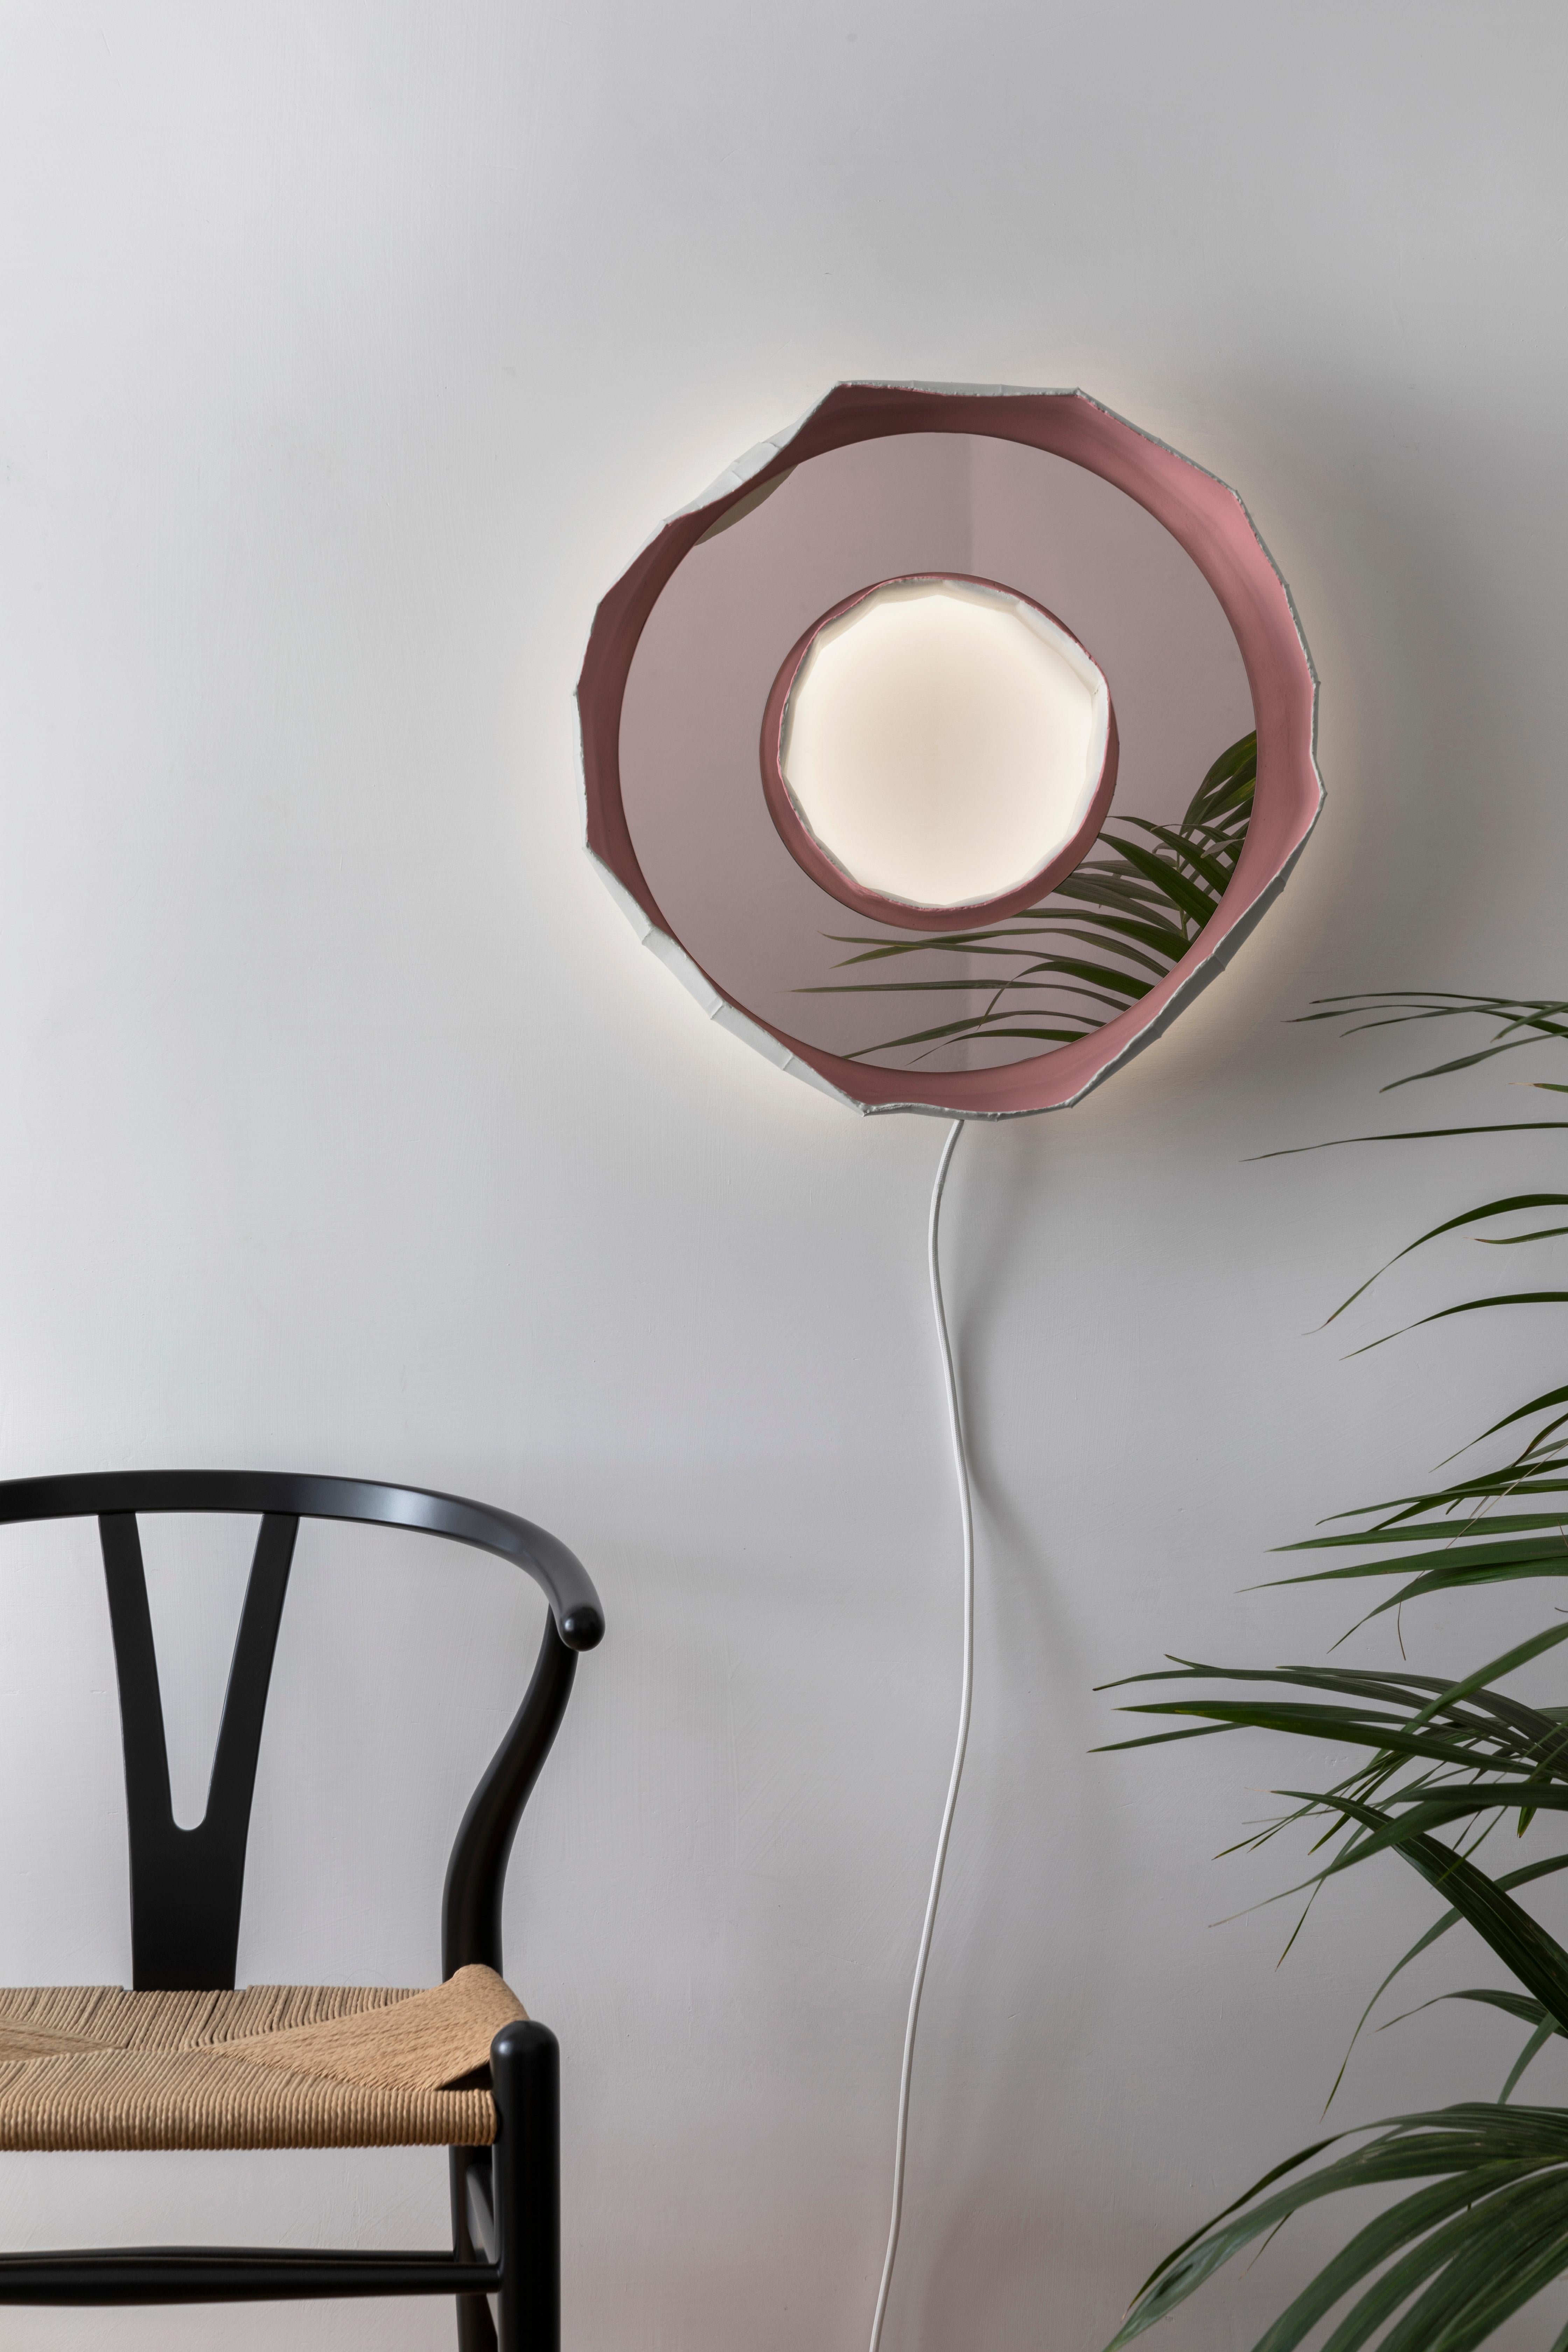 Ring Aura, a stunning mirror-lamp handmade in Italy, one of 2 designs that make up the collection Reflections, the result of a collaboration between artist Paola Paronetto & designer Giovanni Botticelli, that integrates ceramic with colour, glass